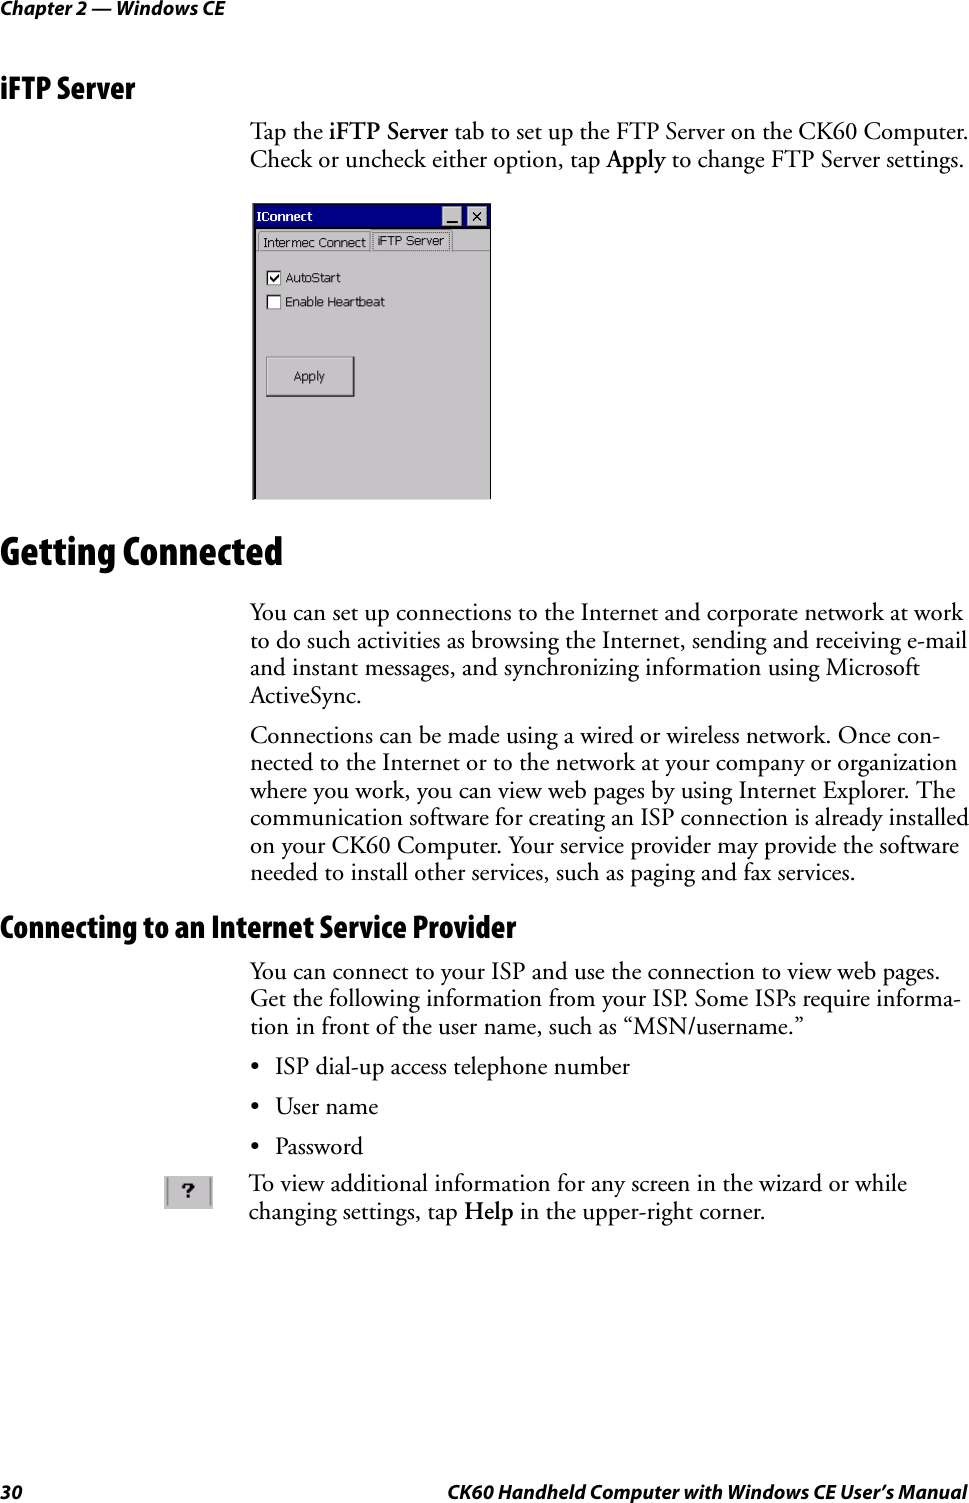 Chapter 2 — Windows CE30 CK60 Handheld Computer with Windows CE User’s ManualiFTP ServerTap the iFTP Server tab to set up the FTP Server on the CK60 Computer. Check or uncheck either option, tap Apply to change FTP Server settings.Getting ConnectedYou can set up connections to the Internet and corporate network at work to do such activities as browsing the Internet, sending and receiving e-mail and instant messages, and synchronizing information using Microsoft ActiveSync.Connections can be made using a wired or wireless network. Once con-nected to the Internet or to the network at your company or organization where you work, you can view web pages by using Internet Explorer. The communication software for creating an ISP connection is already installed on your CK60 Computer. Your service provider may provide the software needed to install other services, such as paging and fax services.Connecting to an Internet Service ProviderYou can connect to your ISP and use the connection to view web pages. Get the following information from your ISP. Some ISPs require informa-tion in front of the user name, such as “MSN/username.”• ISP dial-up access telephone number•User name•PasswordTo view additional information for any screen in the wizard or while changing settings, tap Help in the upper-right corner.